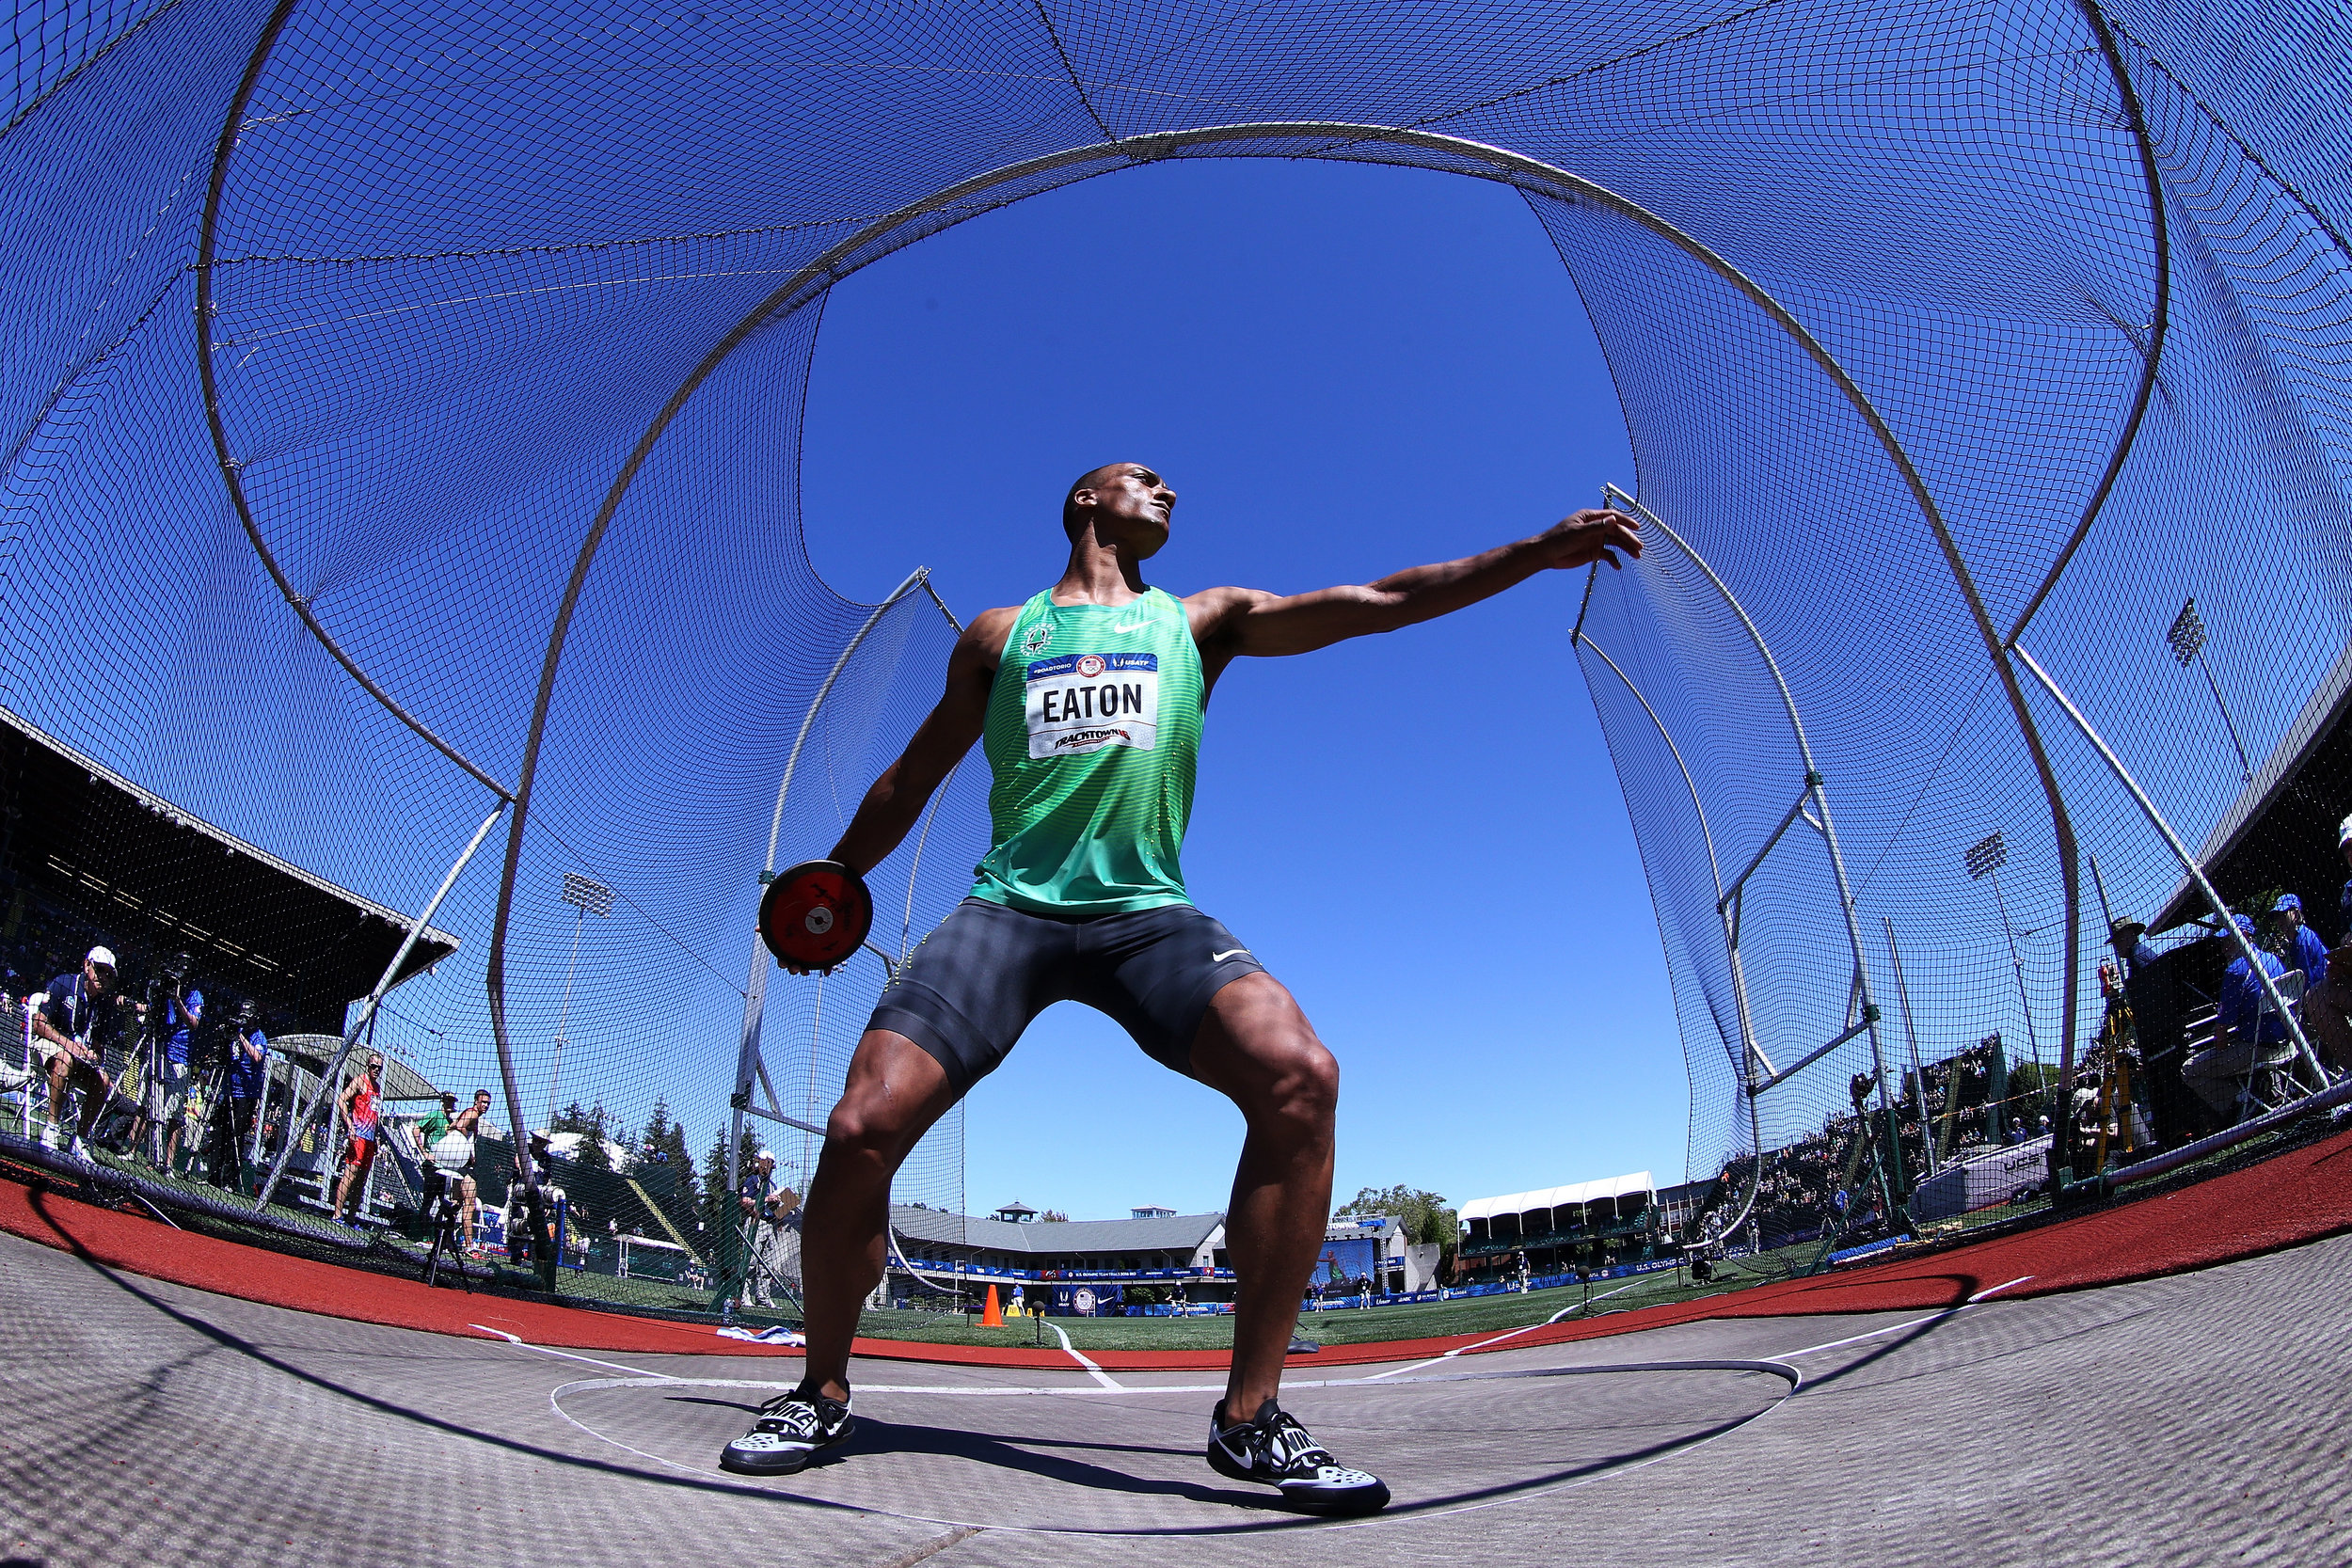 Ashton Eaton throwing in the decathlon discus // Getty Images